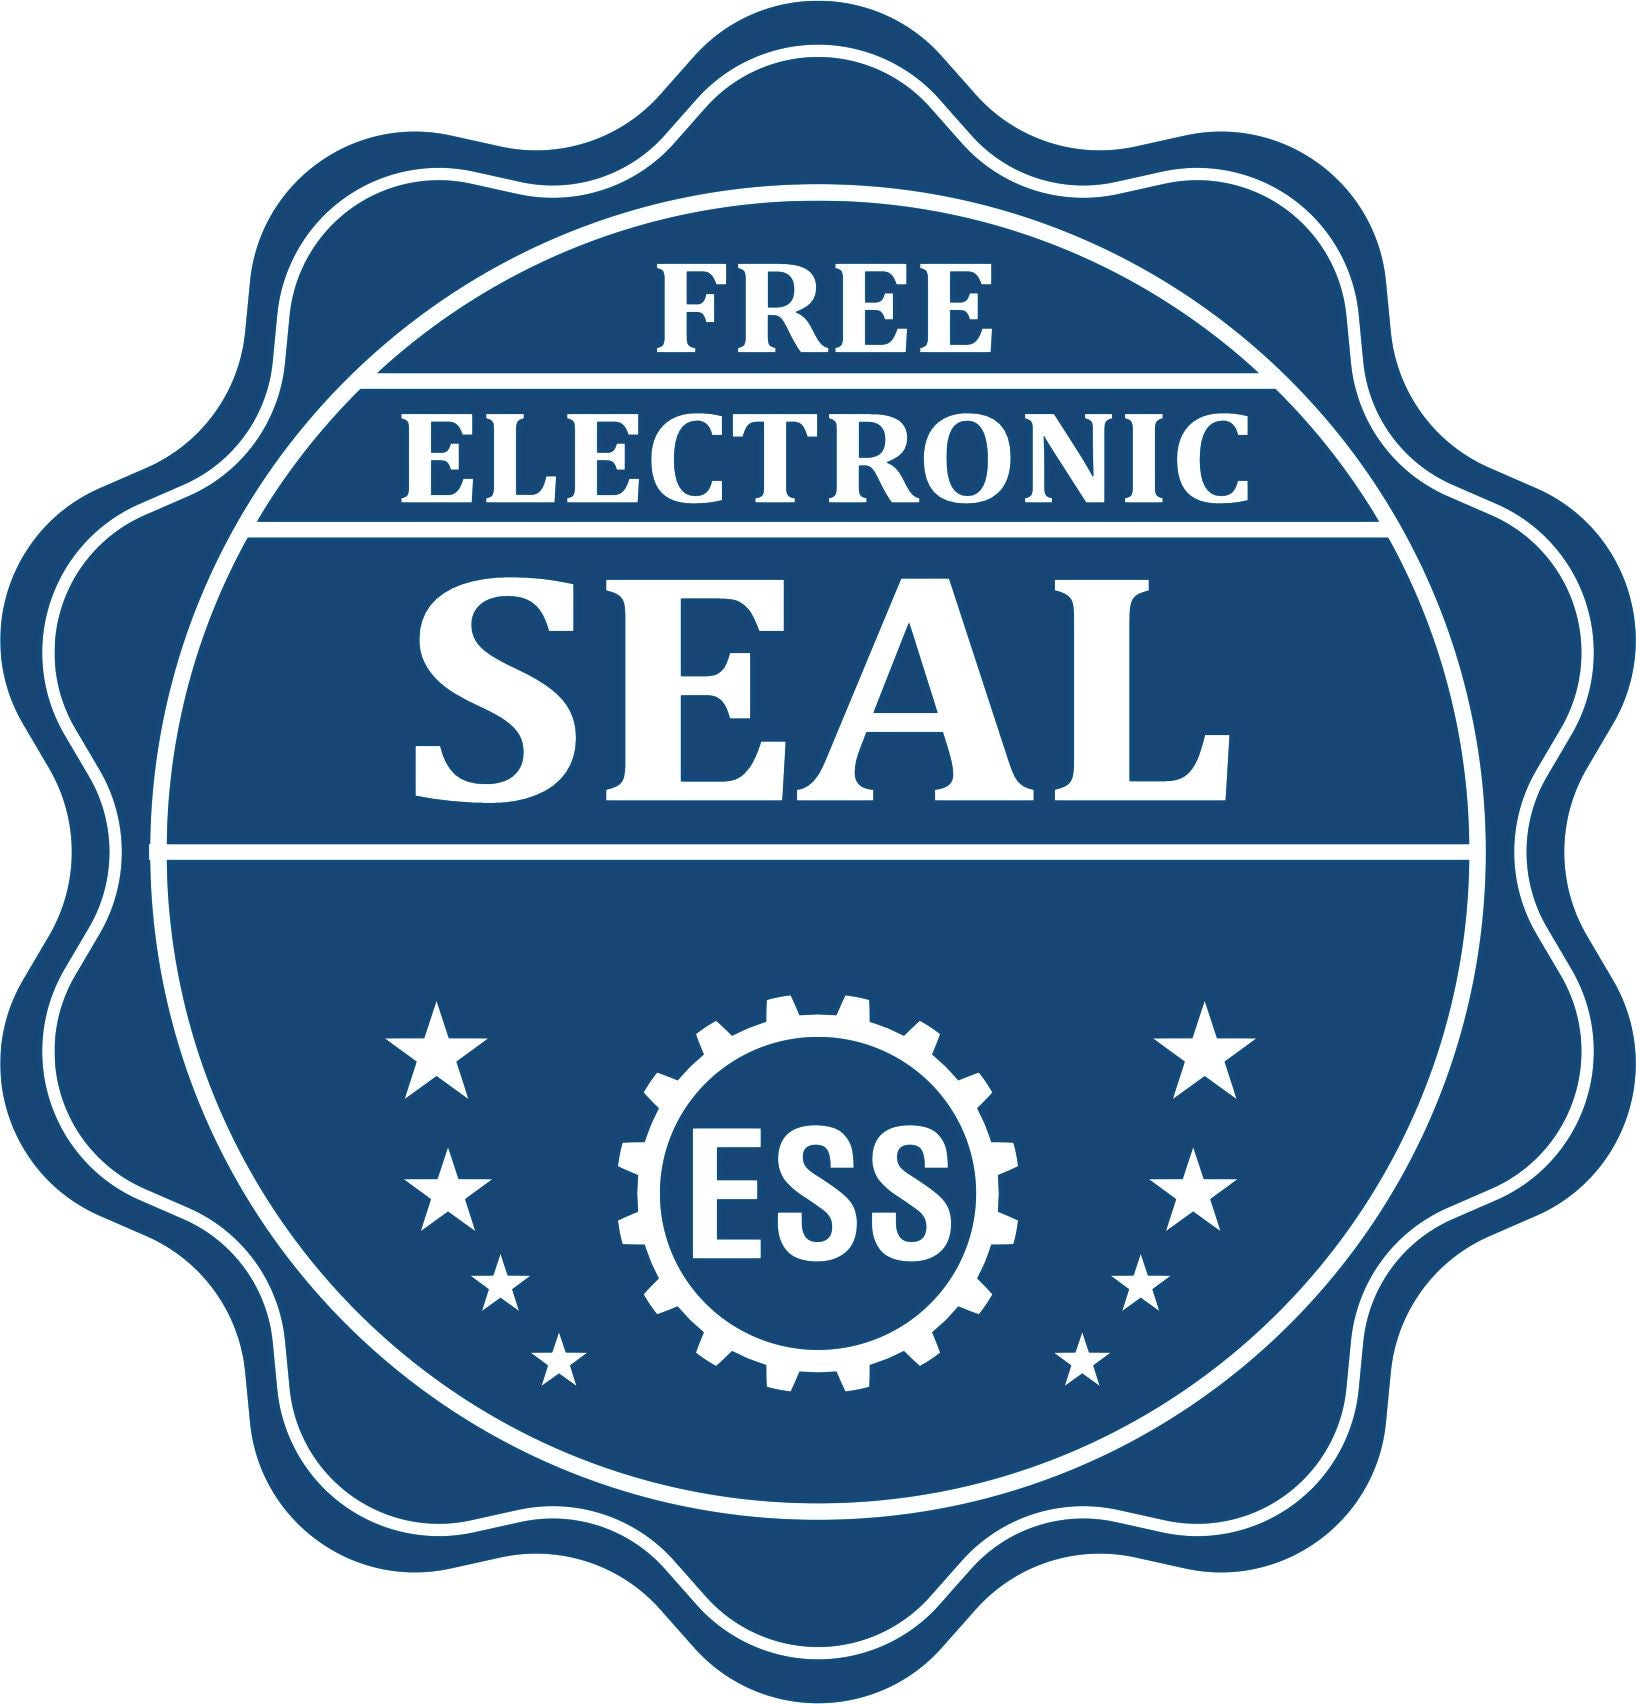 A badge showing a free electronic seal for the PSI Delaware Notary Stamp with stars and the ESS gear on the emblem.